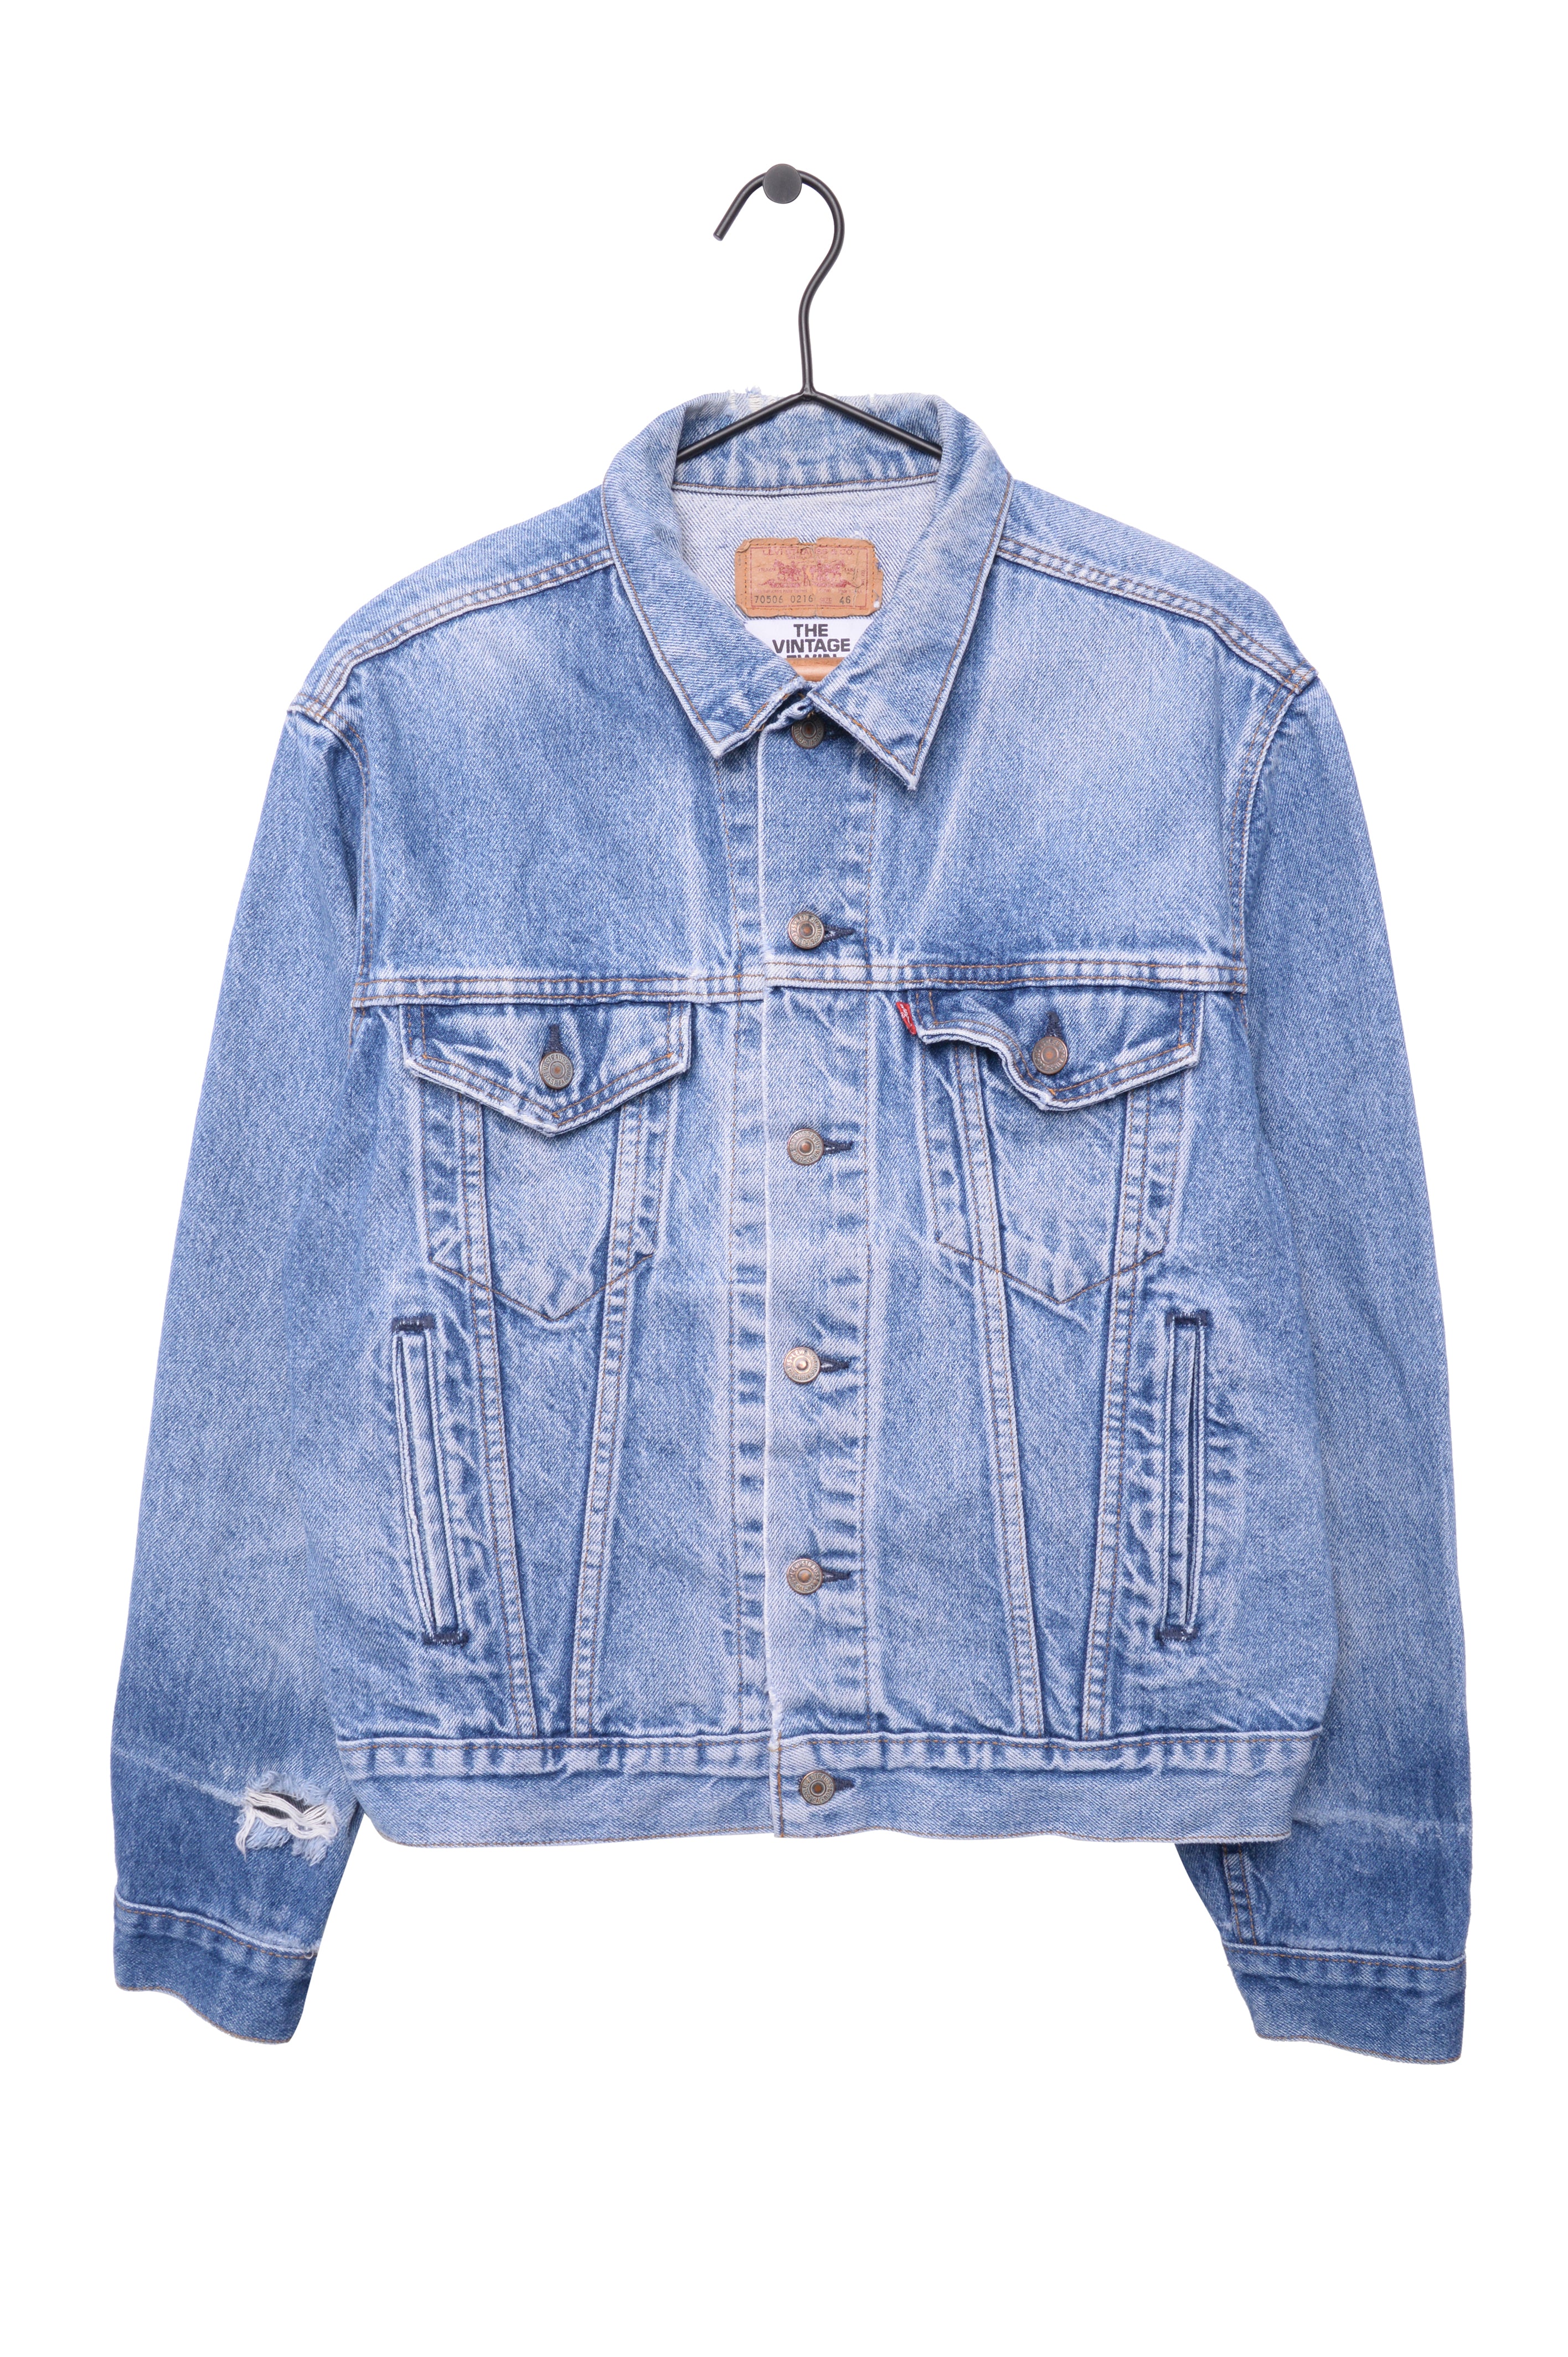 Levi's Denim Jacket Free Shipping - The Vintage Twin